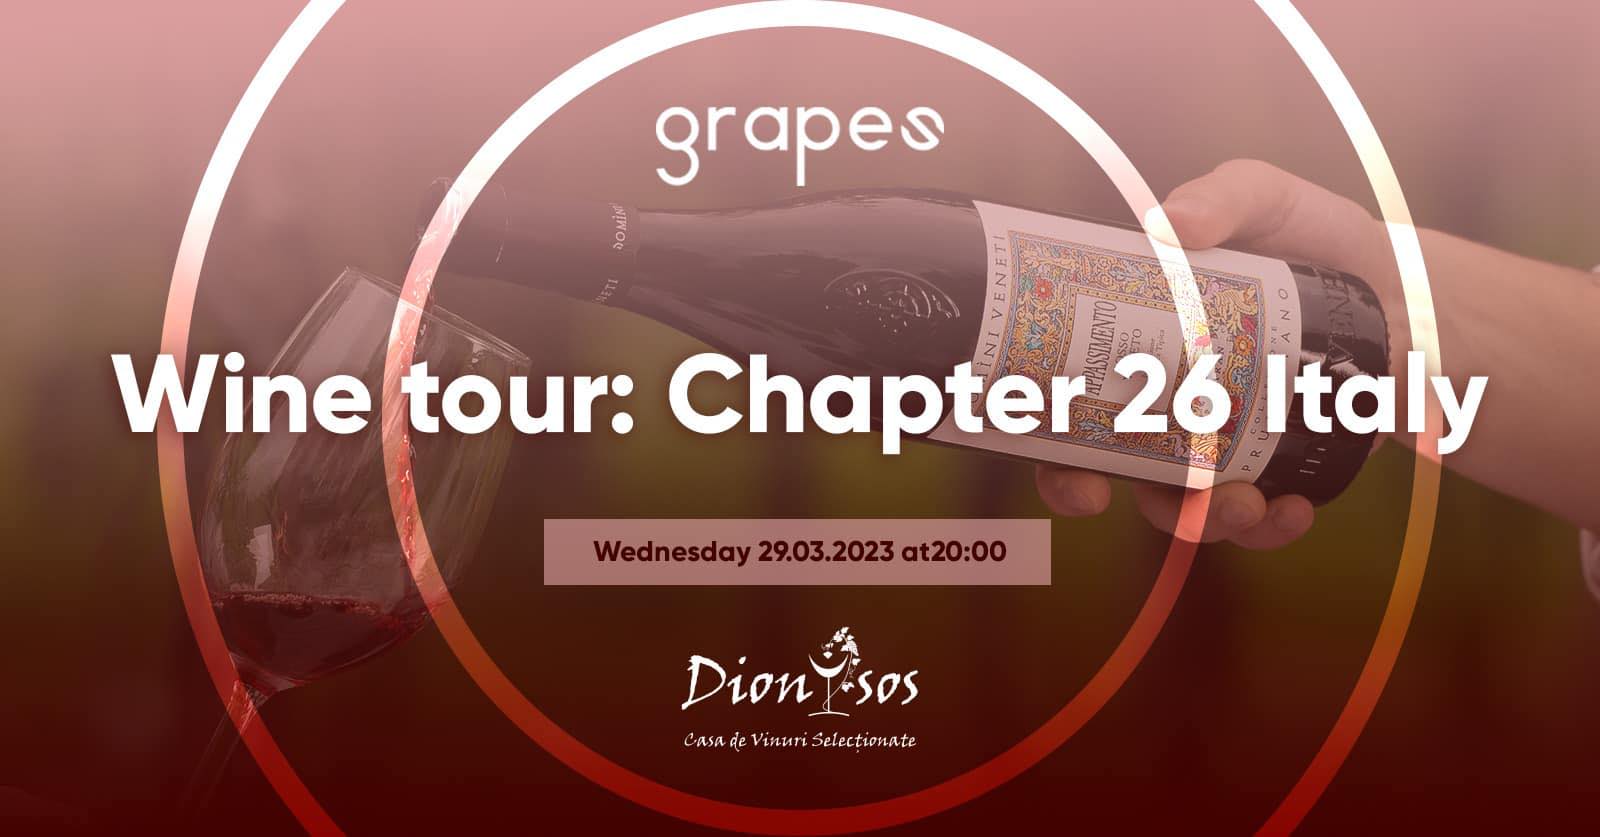 Grapes wine tour | Chapter 26 Italy (Bucuresti)